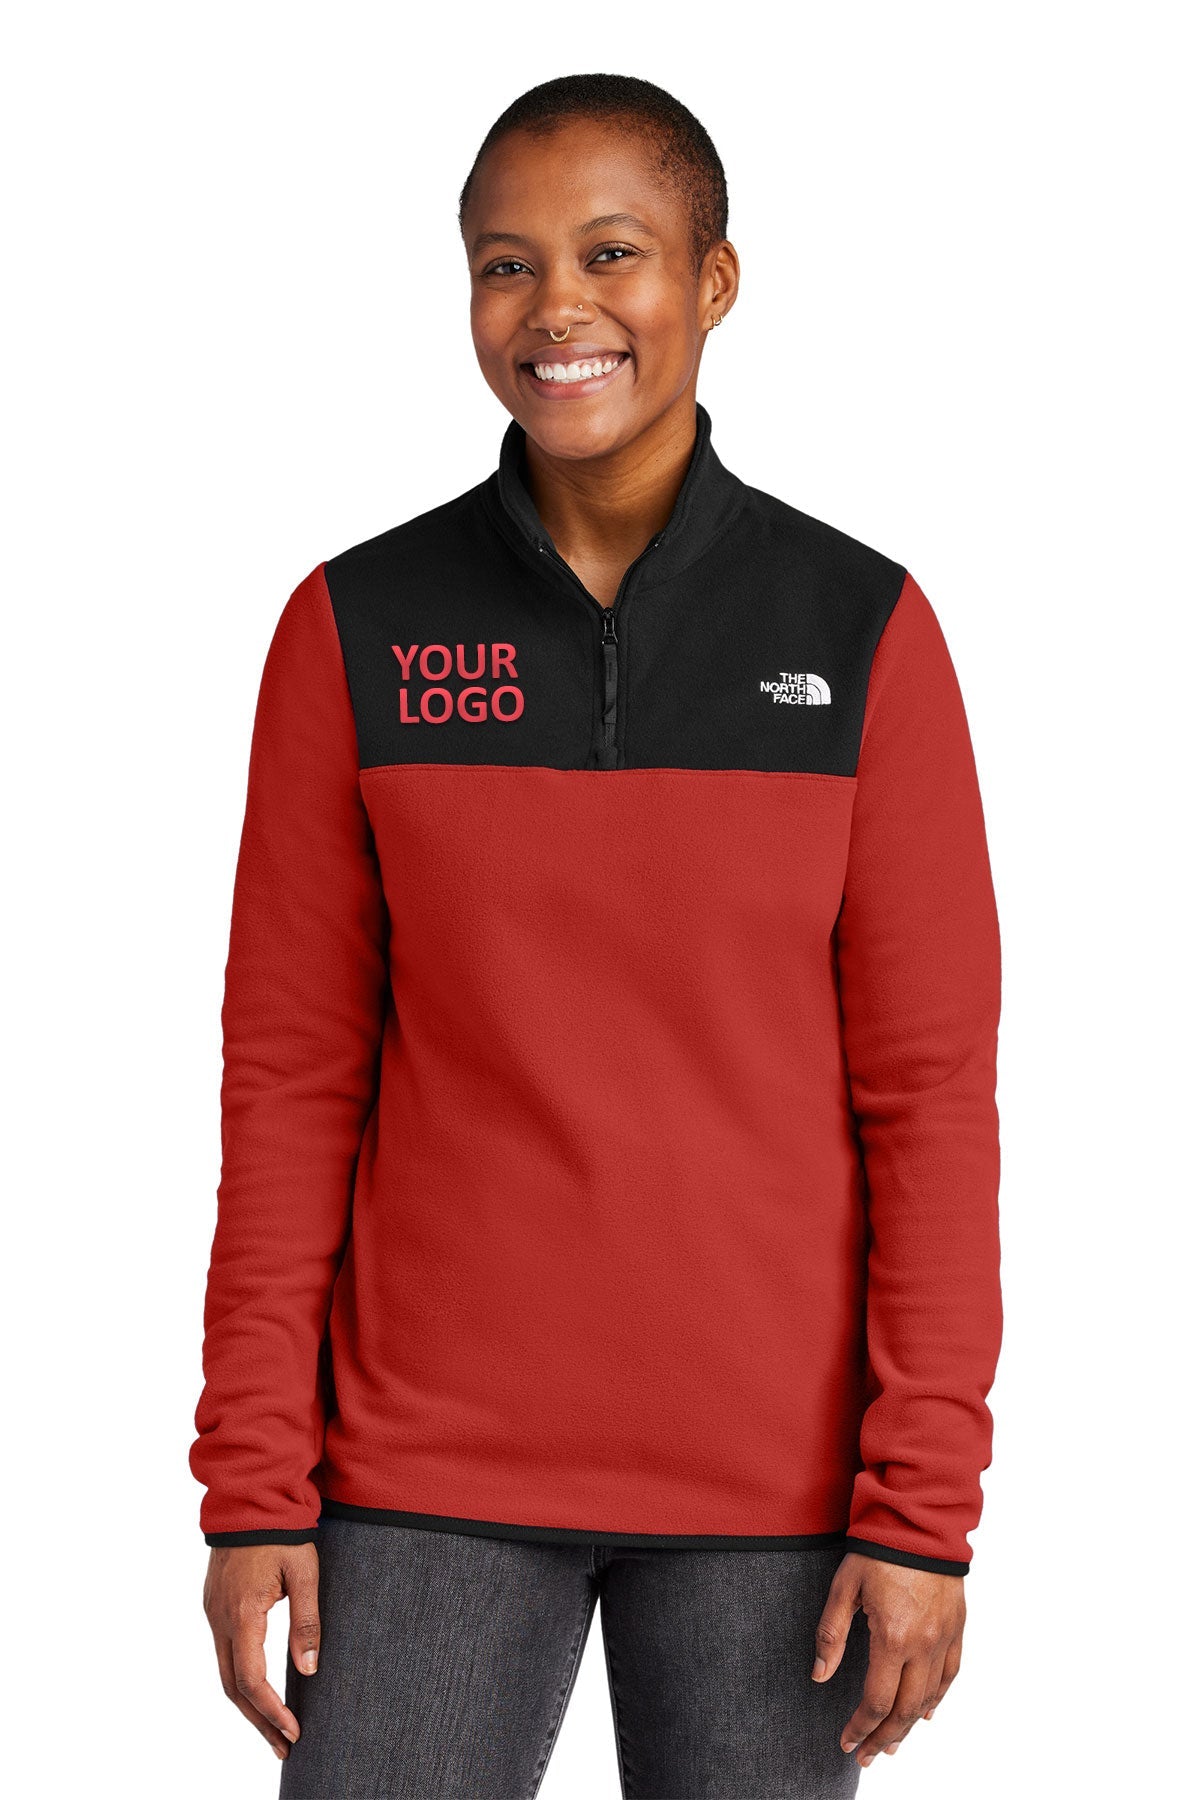 The North Face Rage Red / TNF Black NF0A7V4M jackets with company logo